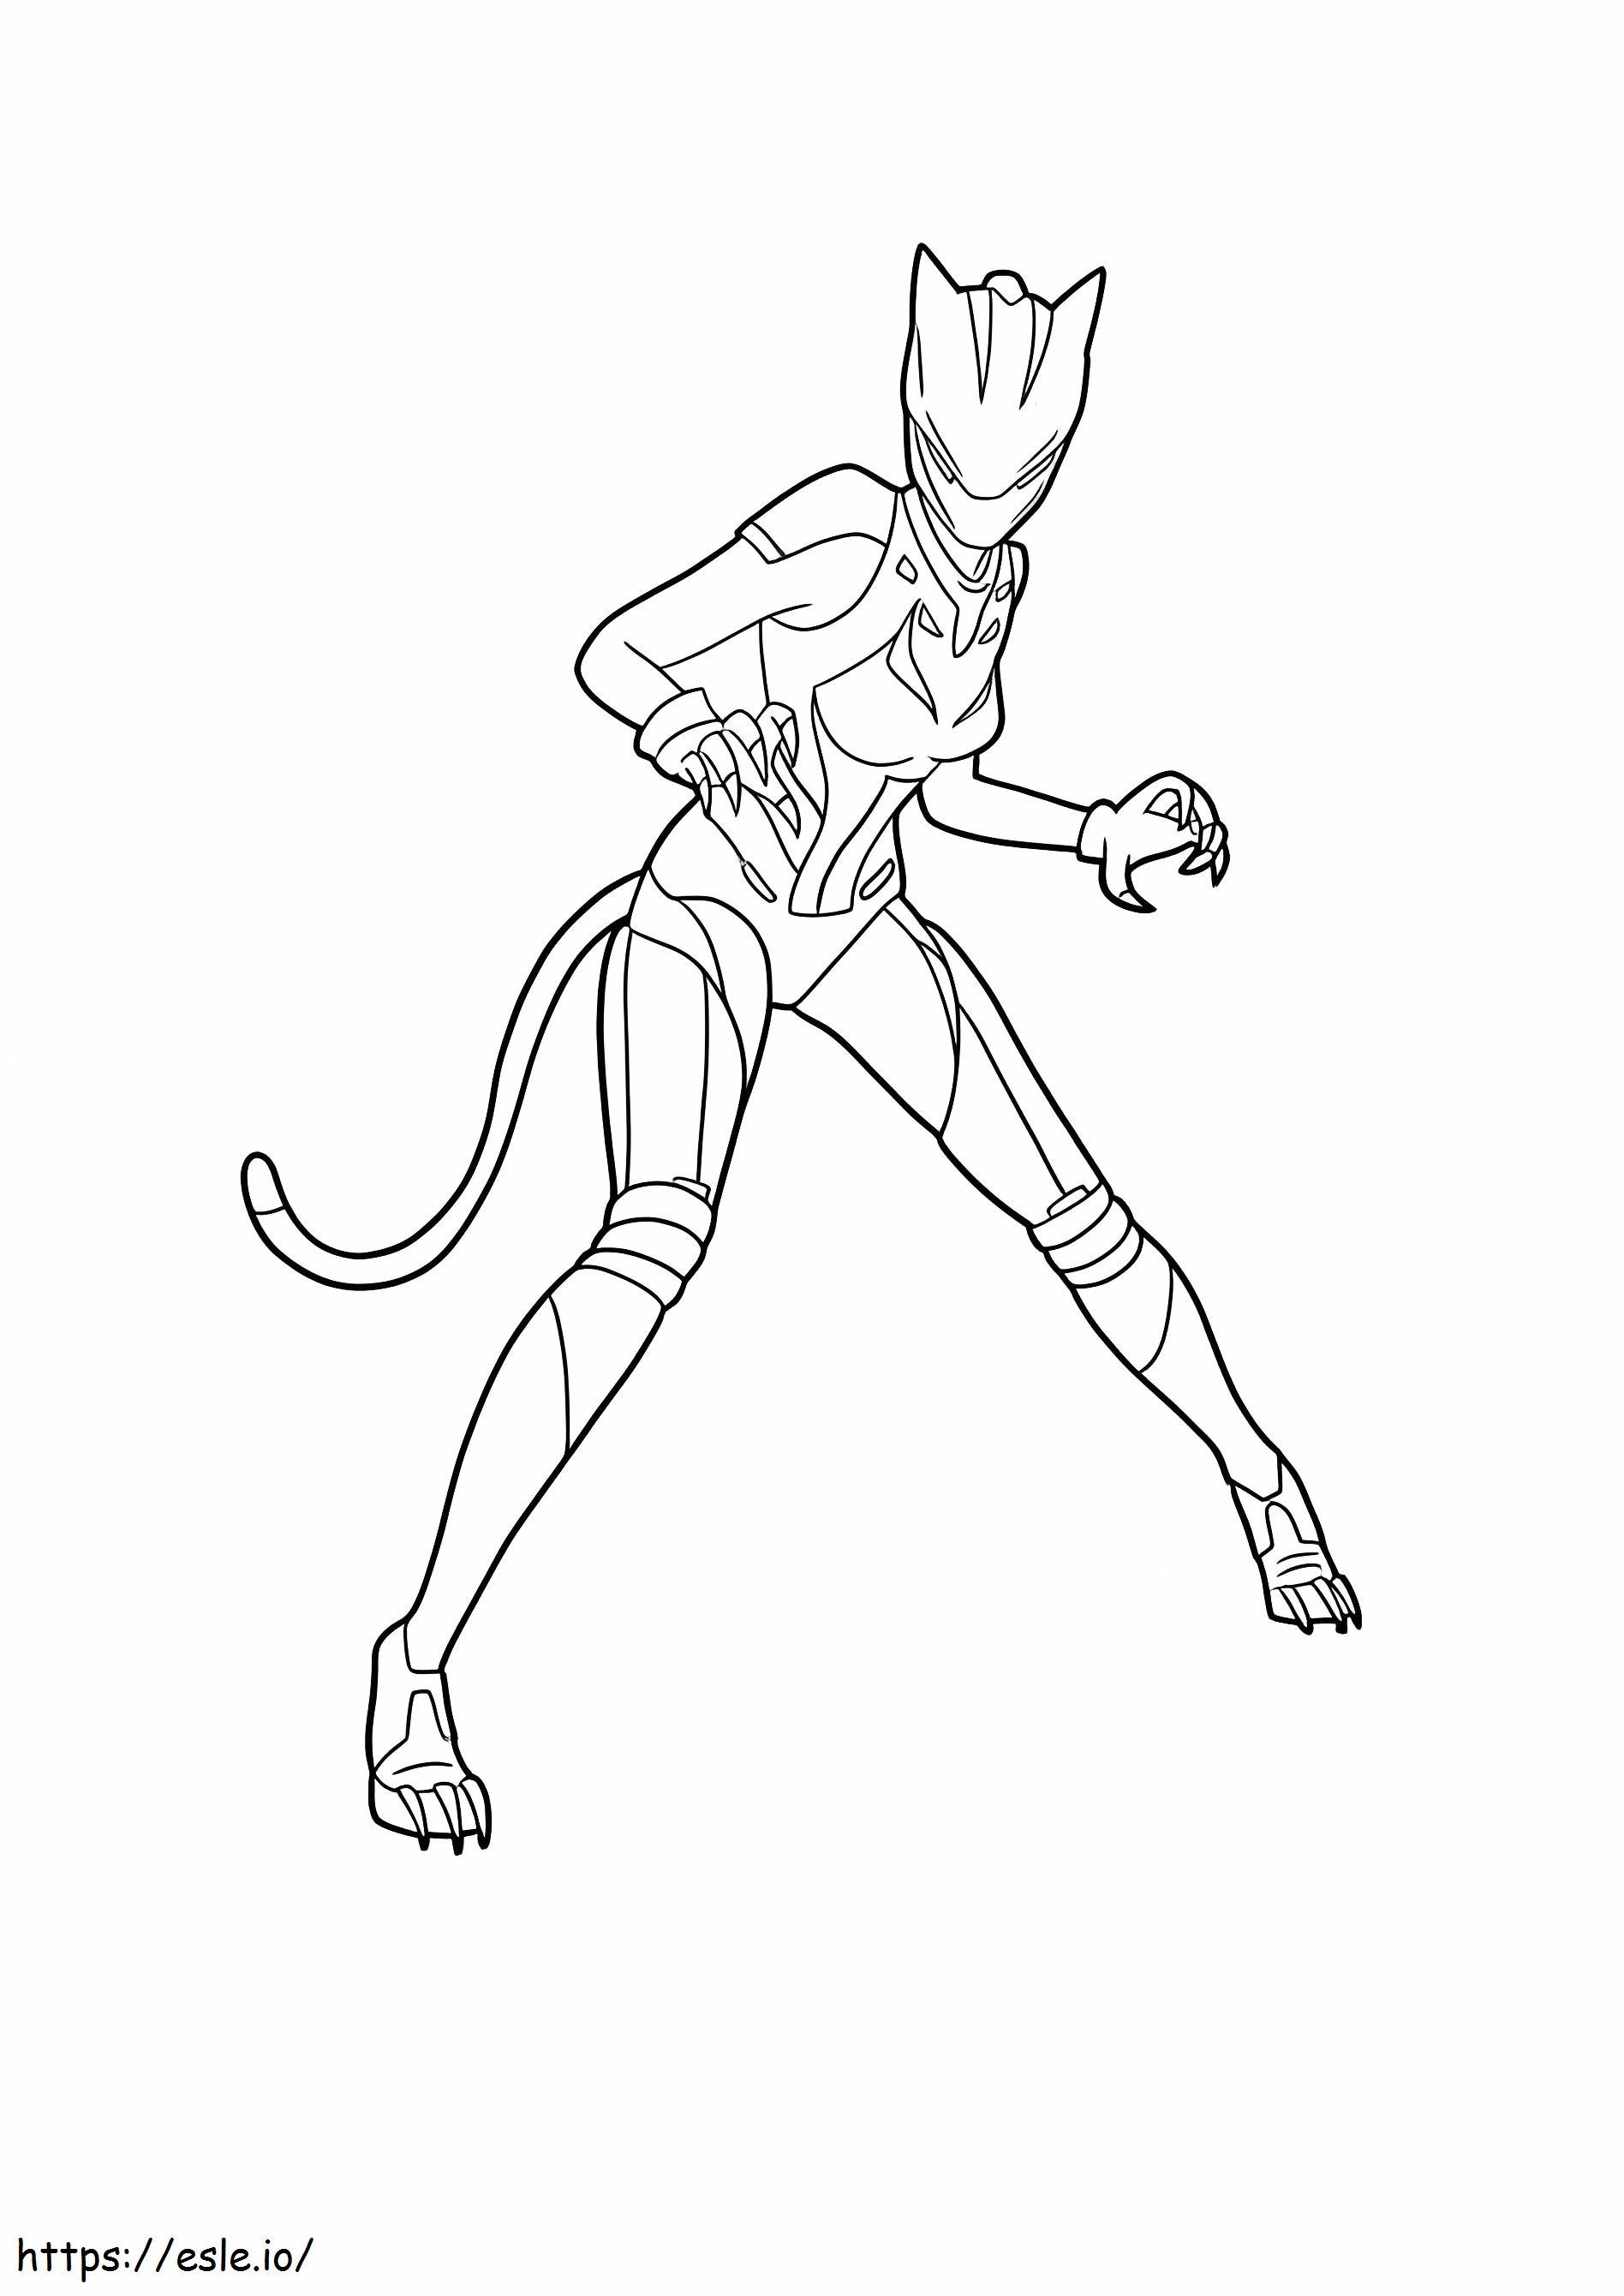 Lynx Max Tier Skin Fighting coloring page